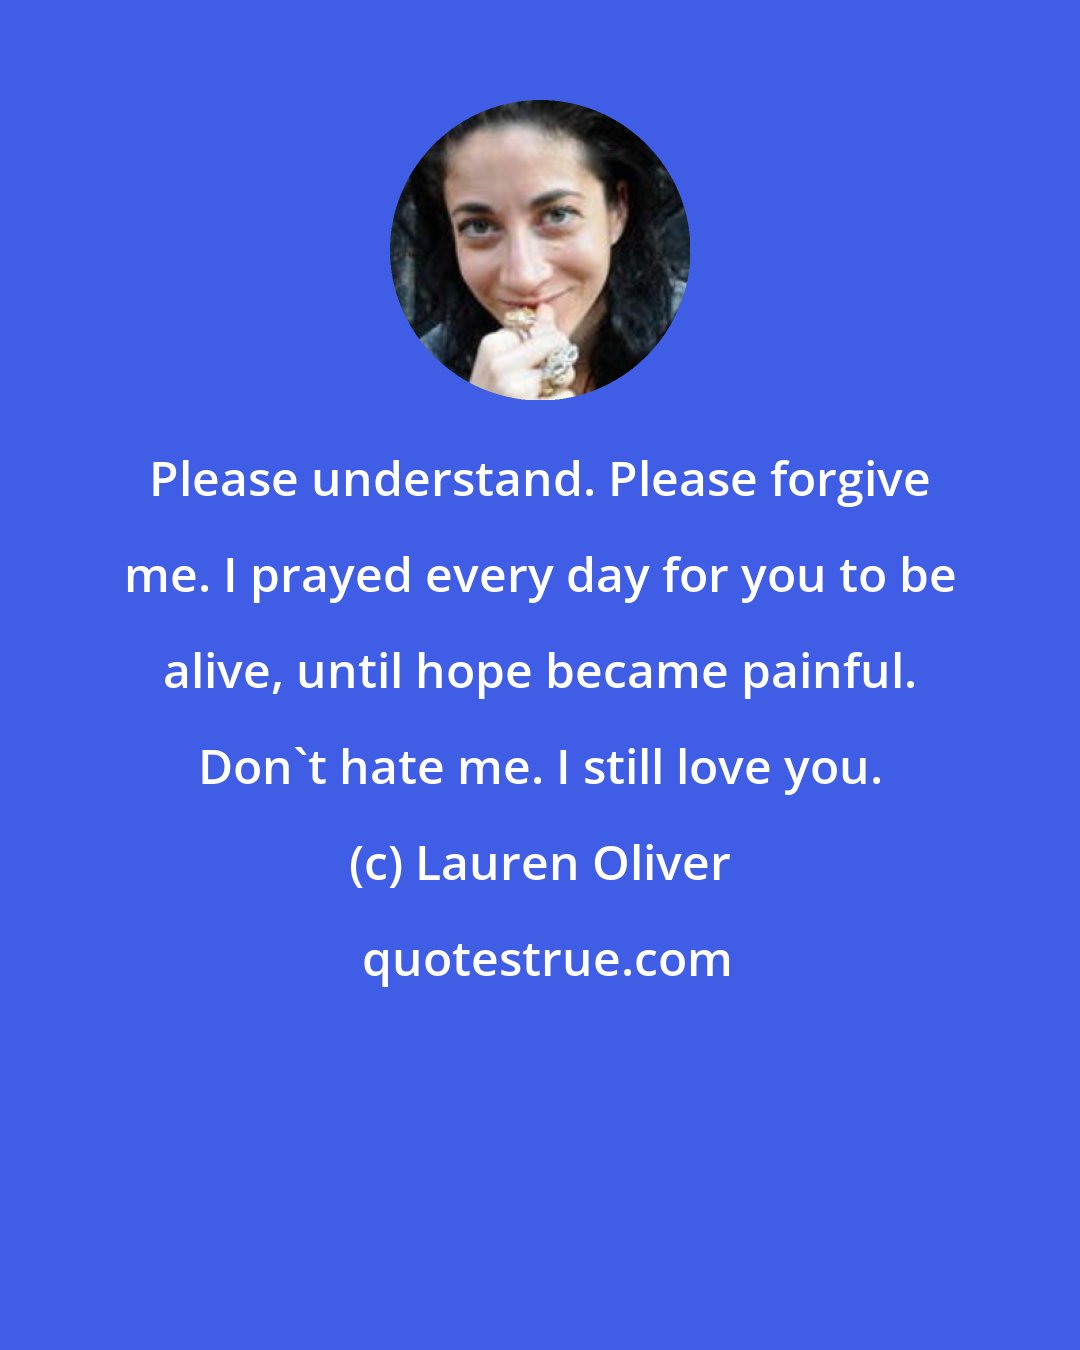 Lauren Oliver: Please understand. Please forgive me. I prayed every day for you to be alive, until hope became painful. Don't hate me. I still love you.